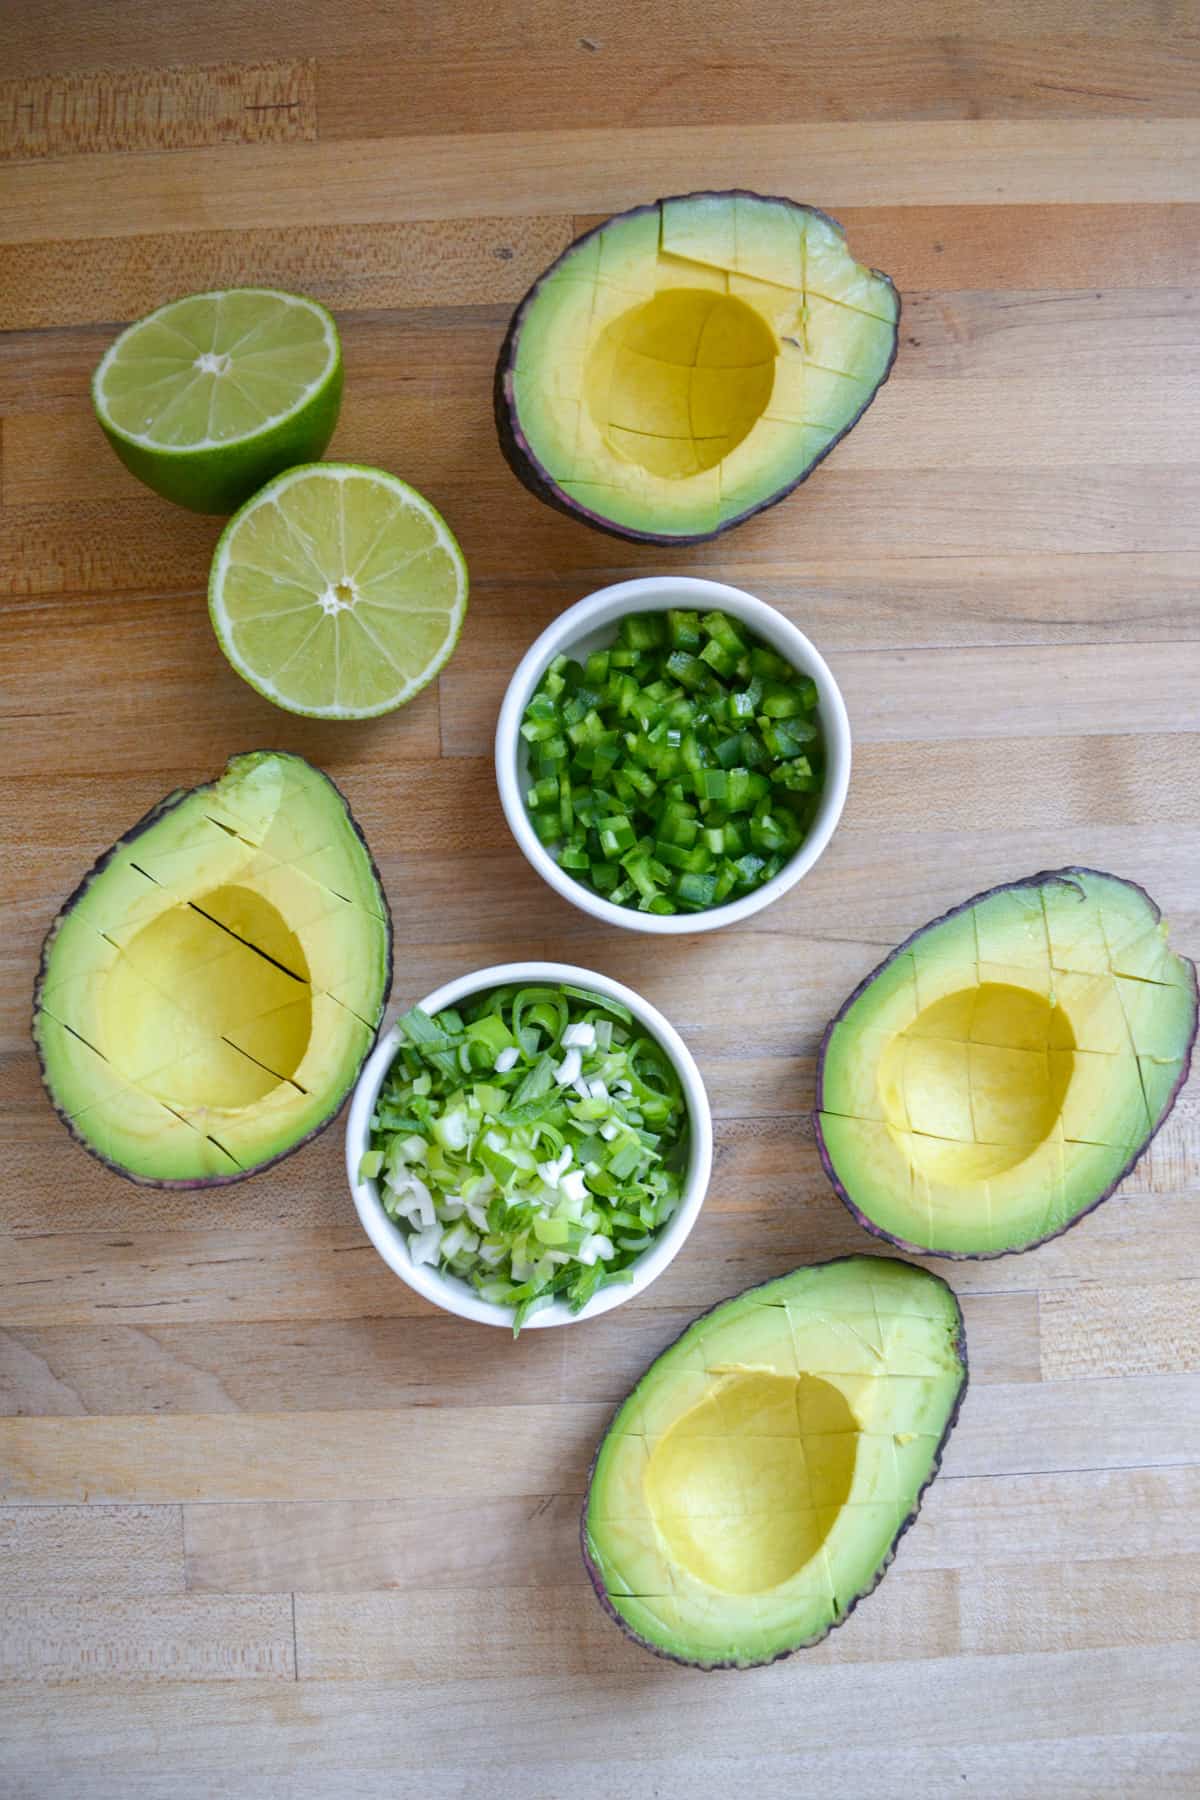 Chopped jalapeño and spring onion in small bowls next to halved avocados.